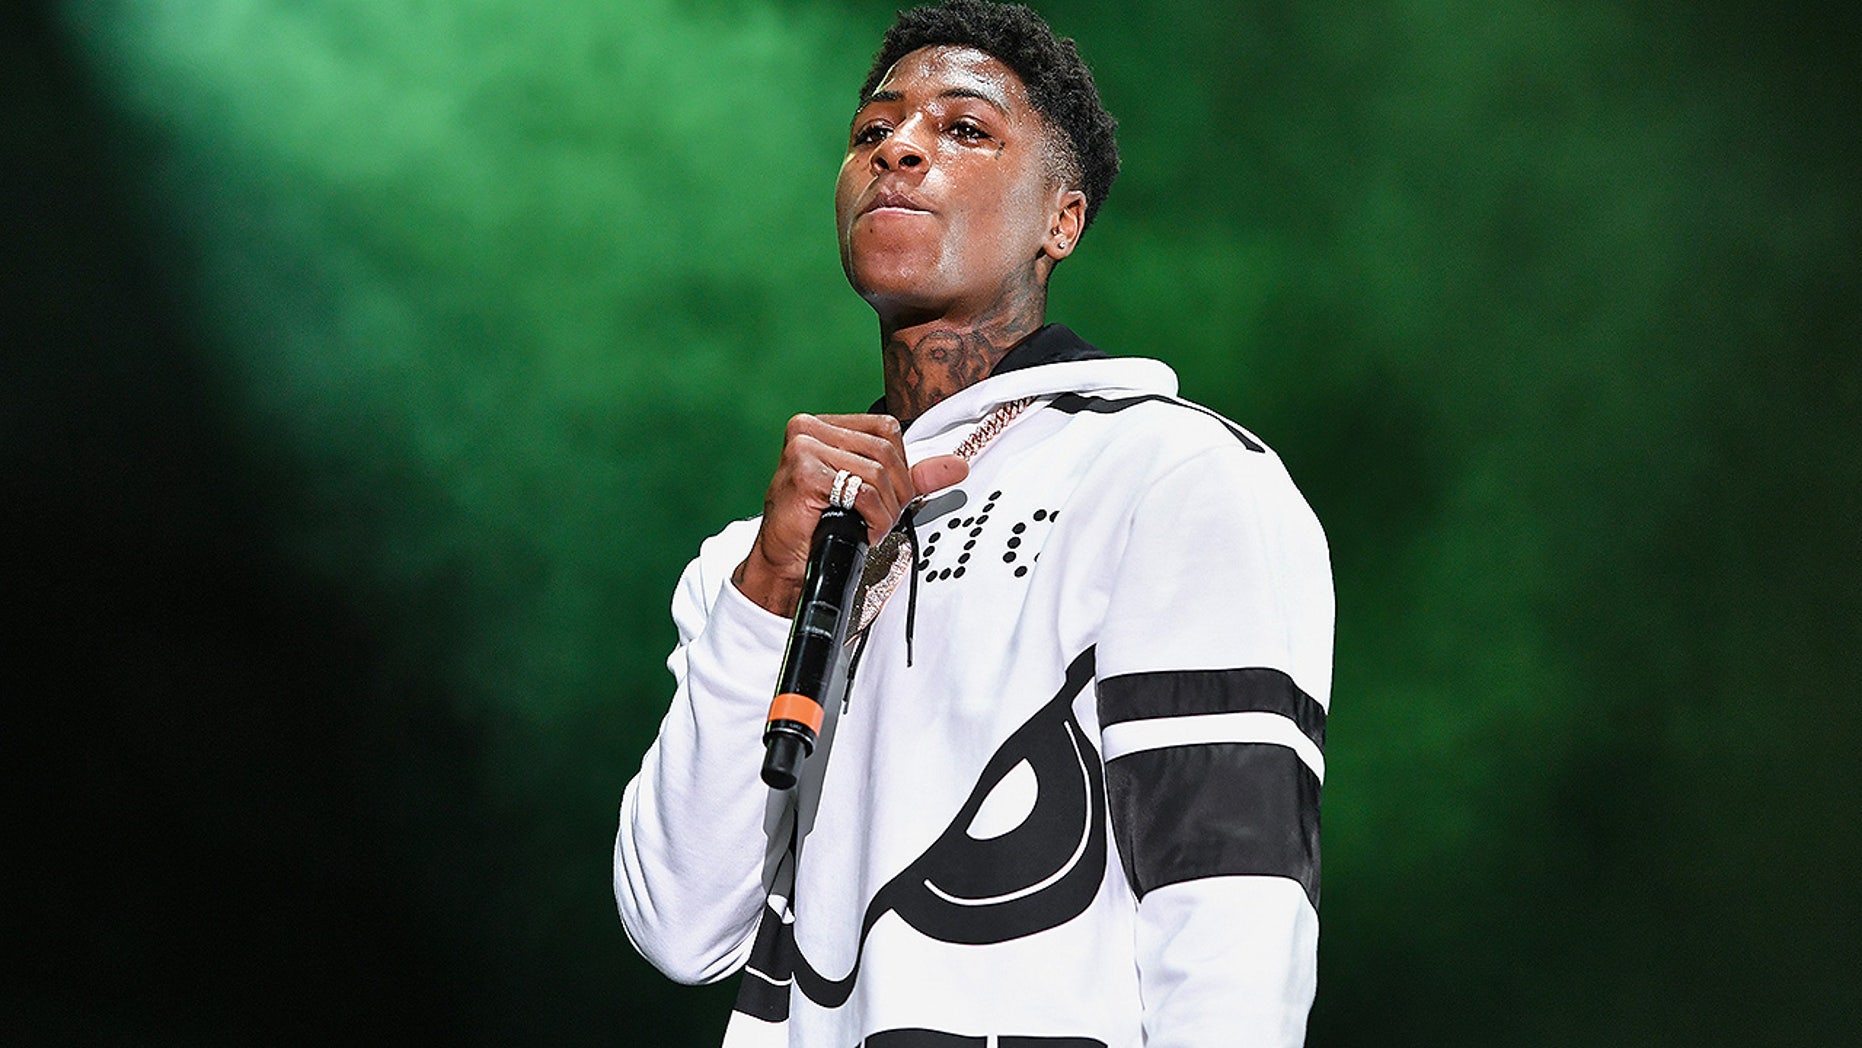 The rapper NBA Youngboy's girlfriend was injured in a deadly shootout in Miami. The scrum would have occurred outside of a Trump complex.